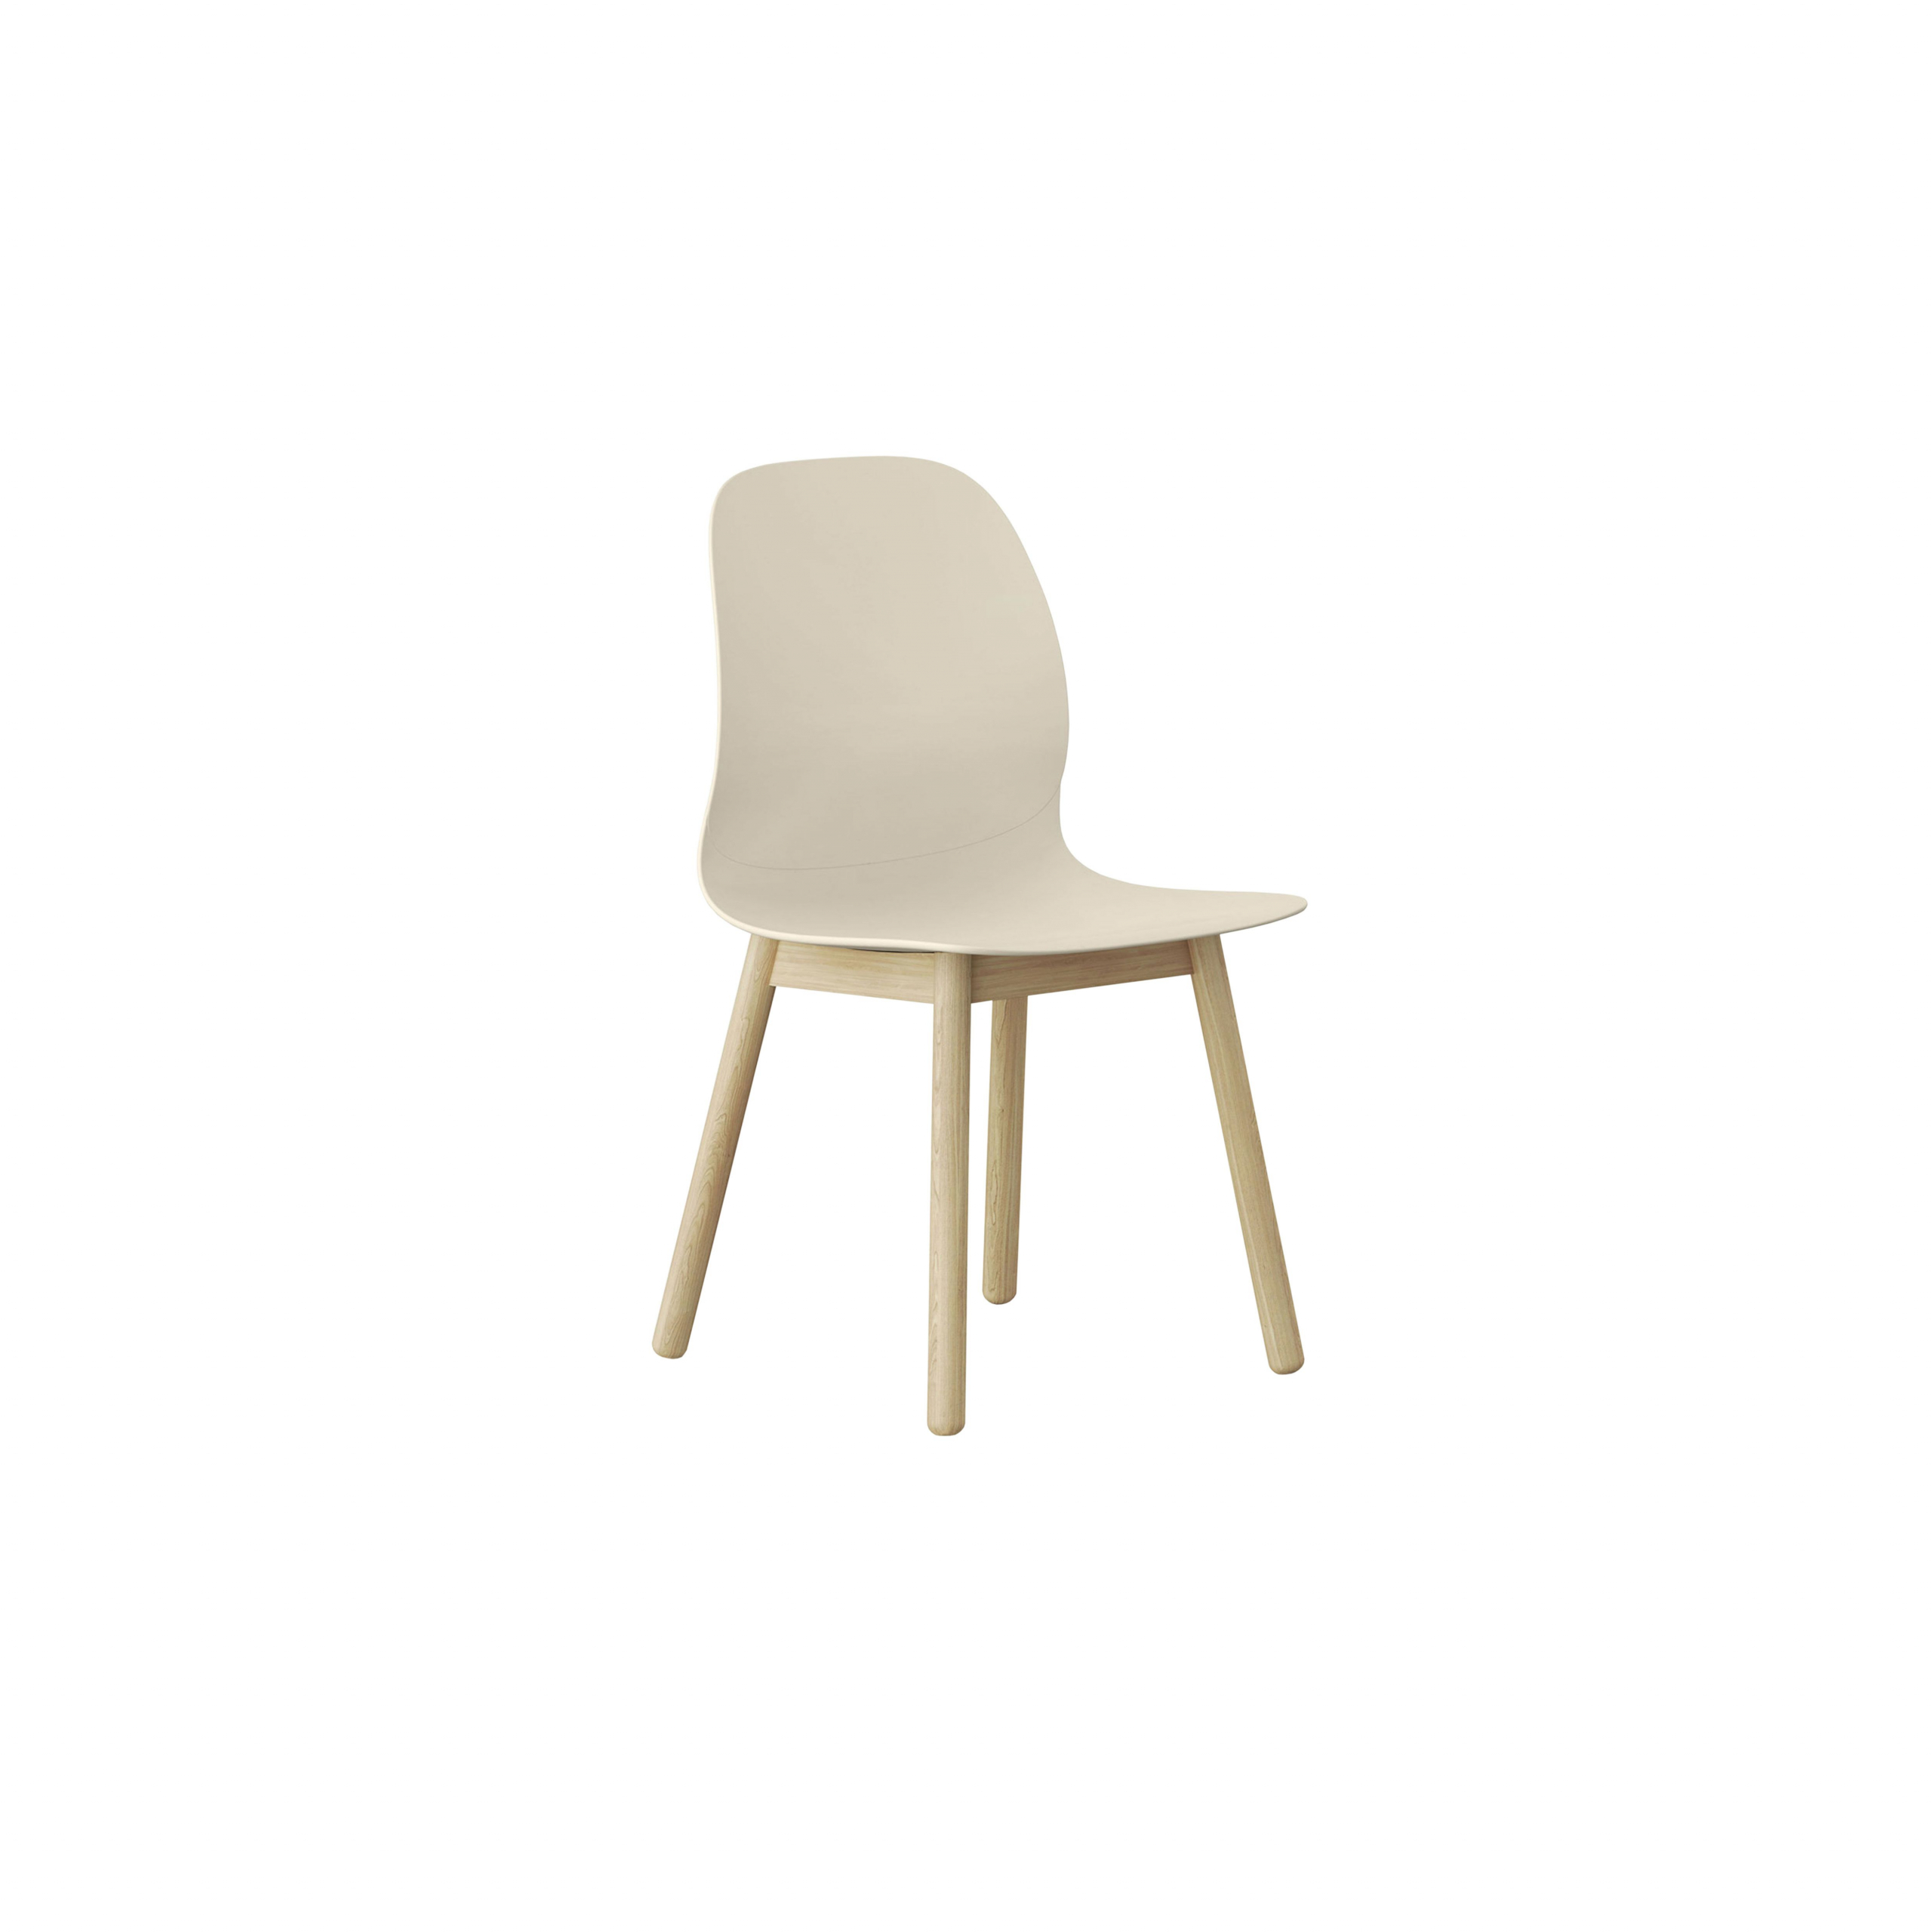 Archie Chair with wooden legs